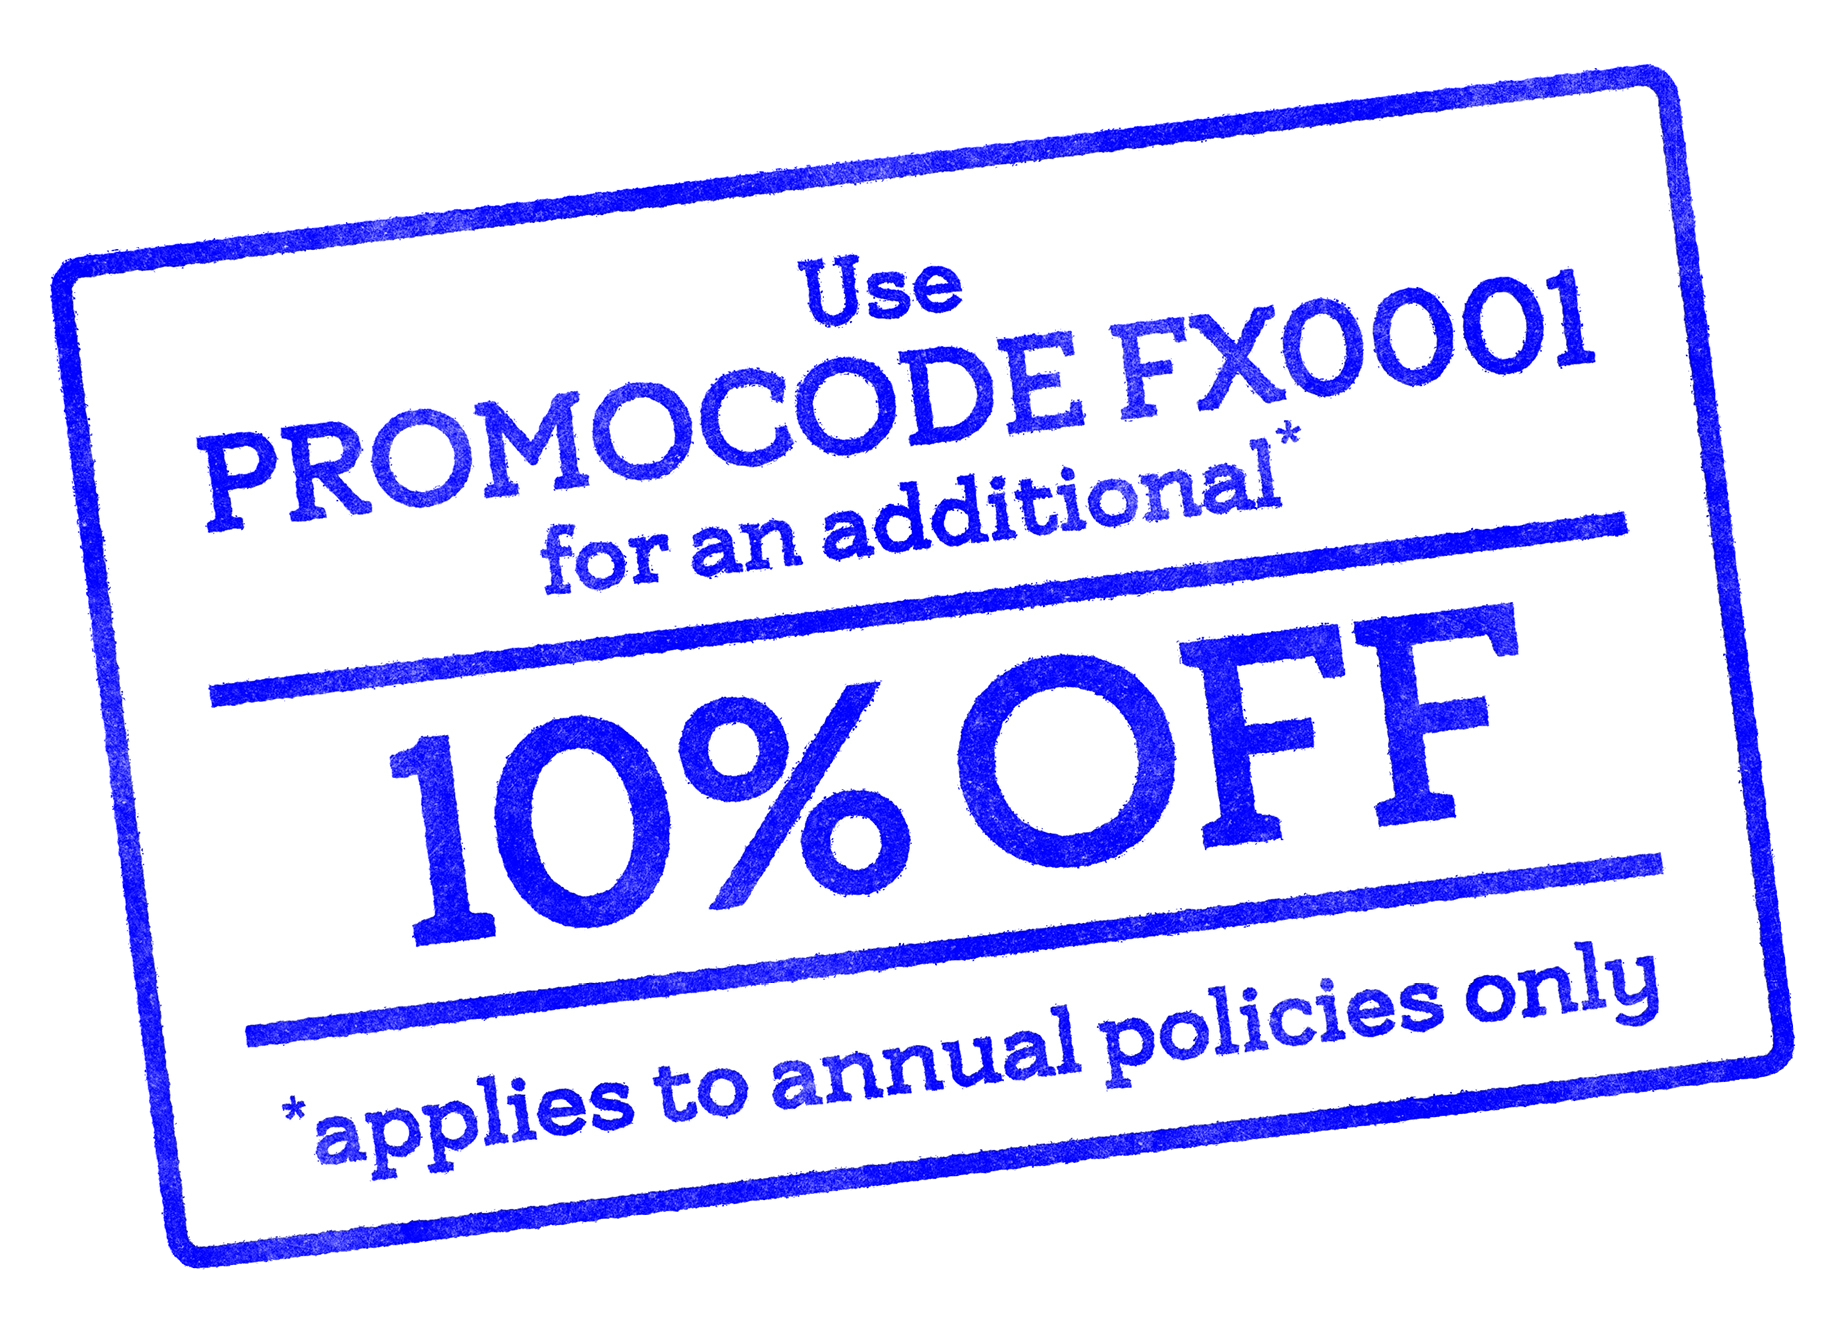 Use Promo Code FX0001 for an additional 10% off your multi trip or Single trip travel policy. Note: this discount applies to annual policies only.